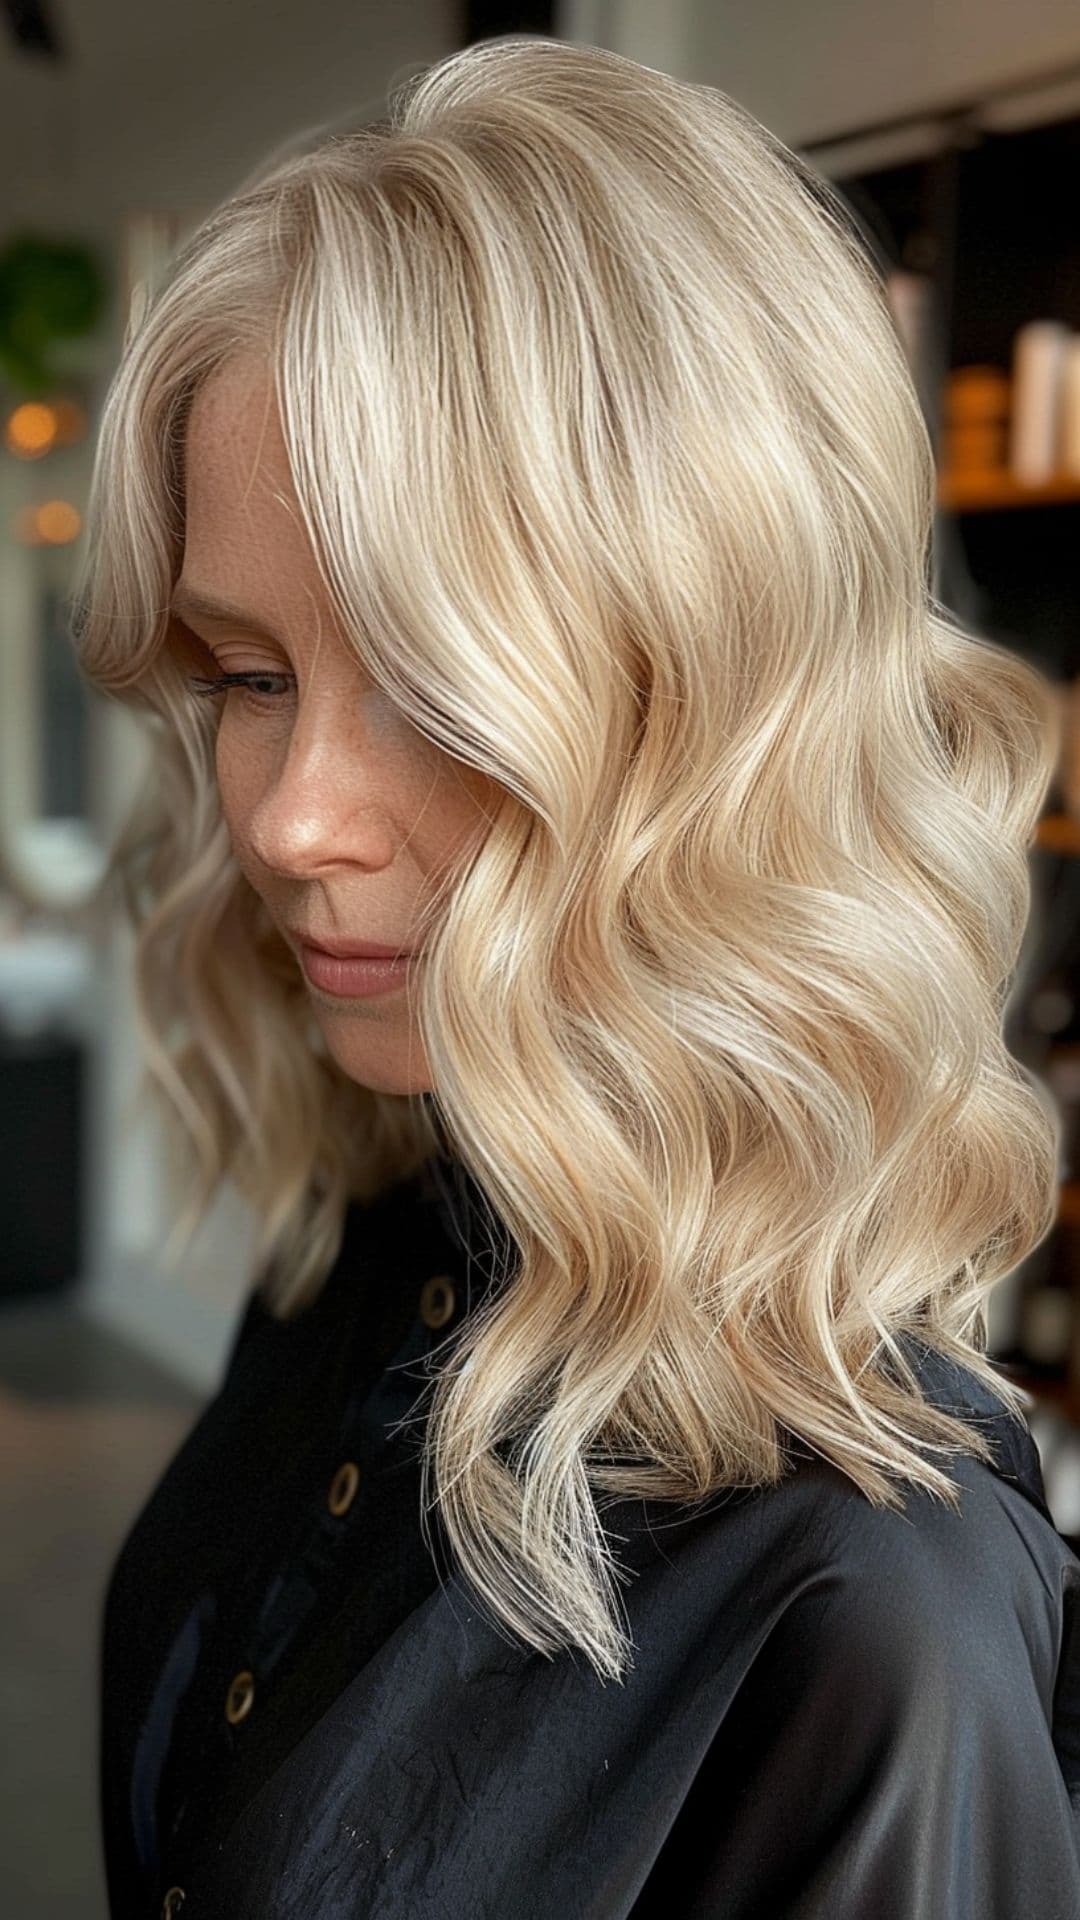 An old woman modelling a buttery blonde wavy hair.